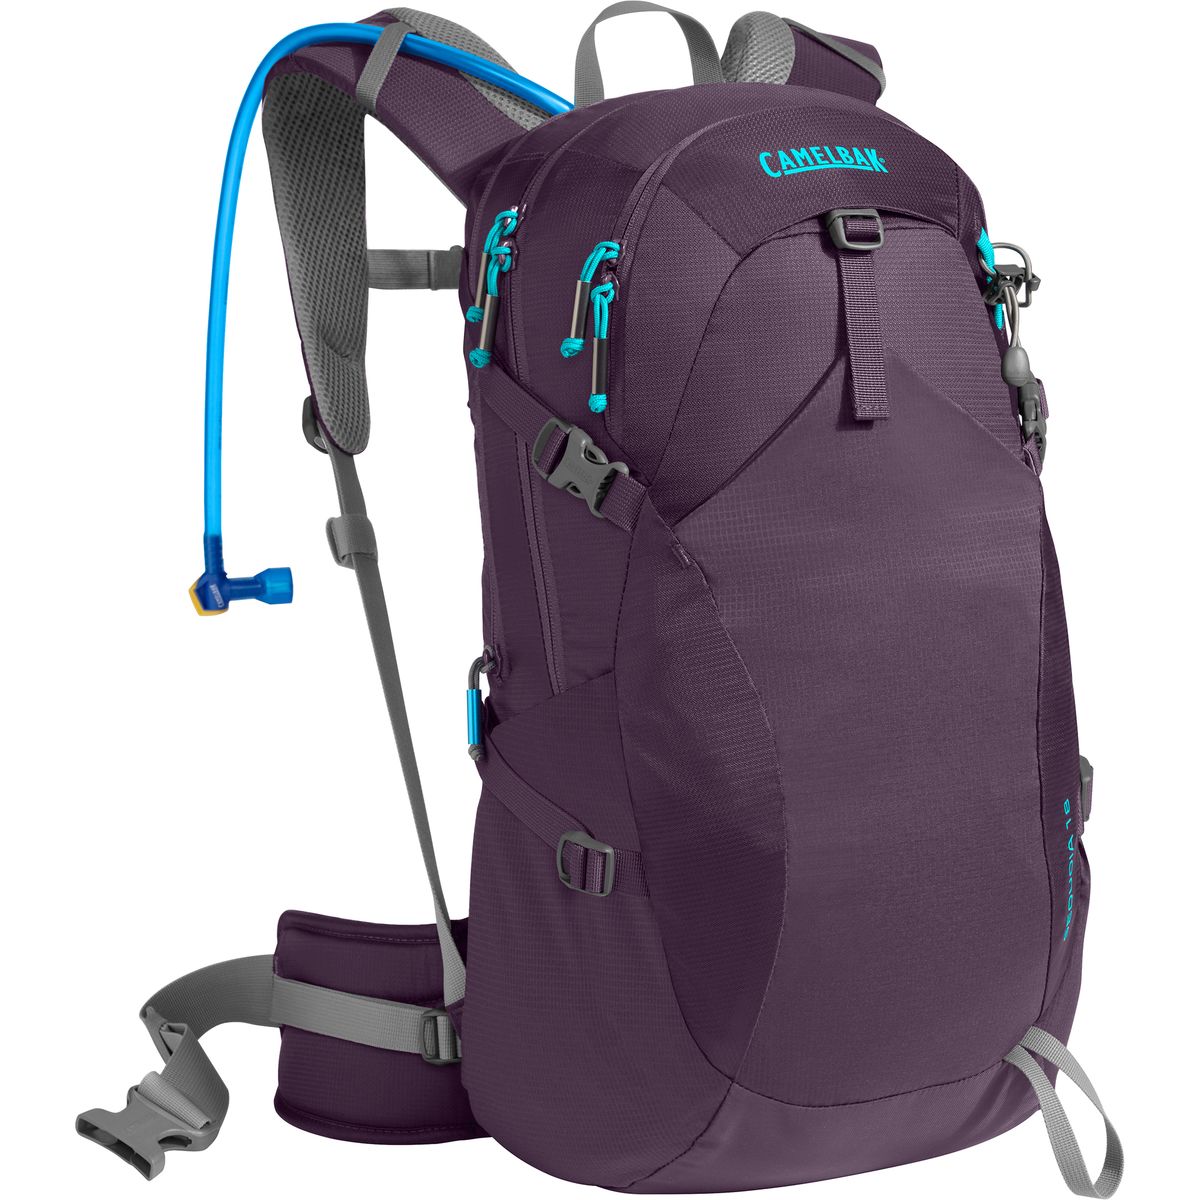 CamelBak Sequoia 18 Hydration Backpack 1098cu in